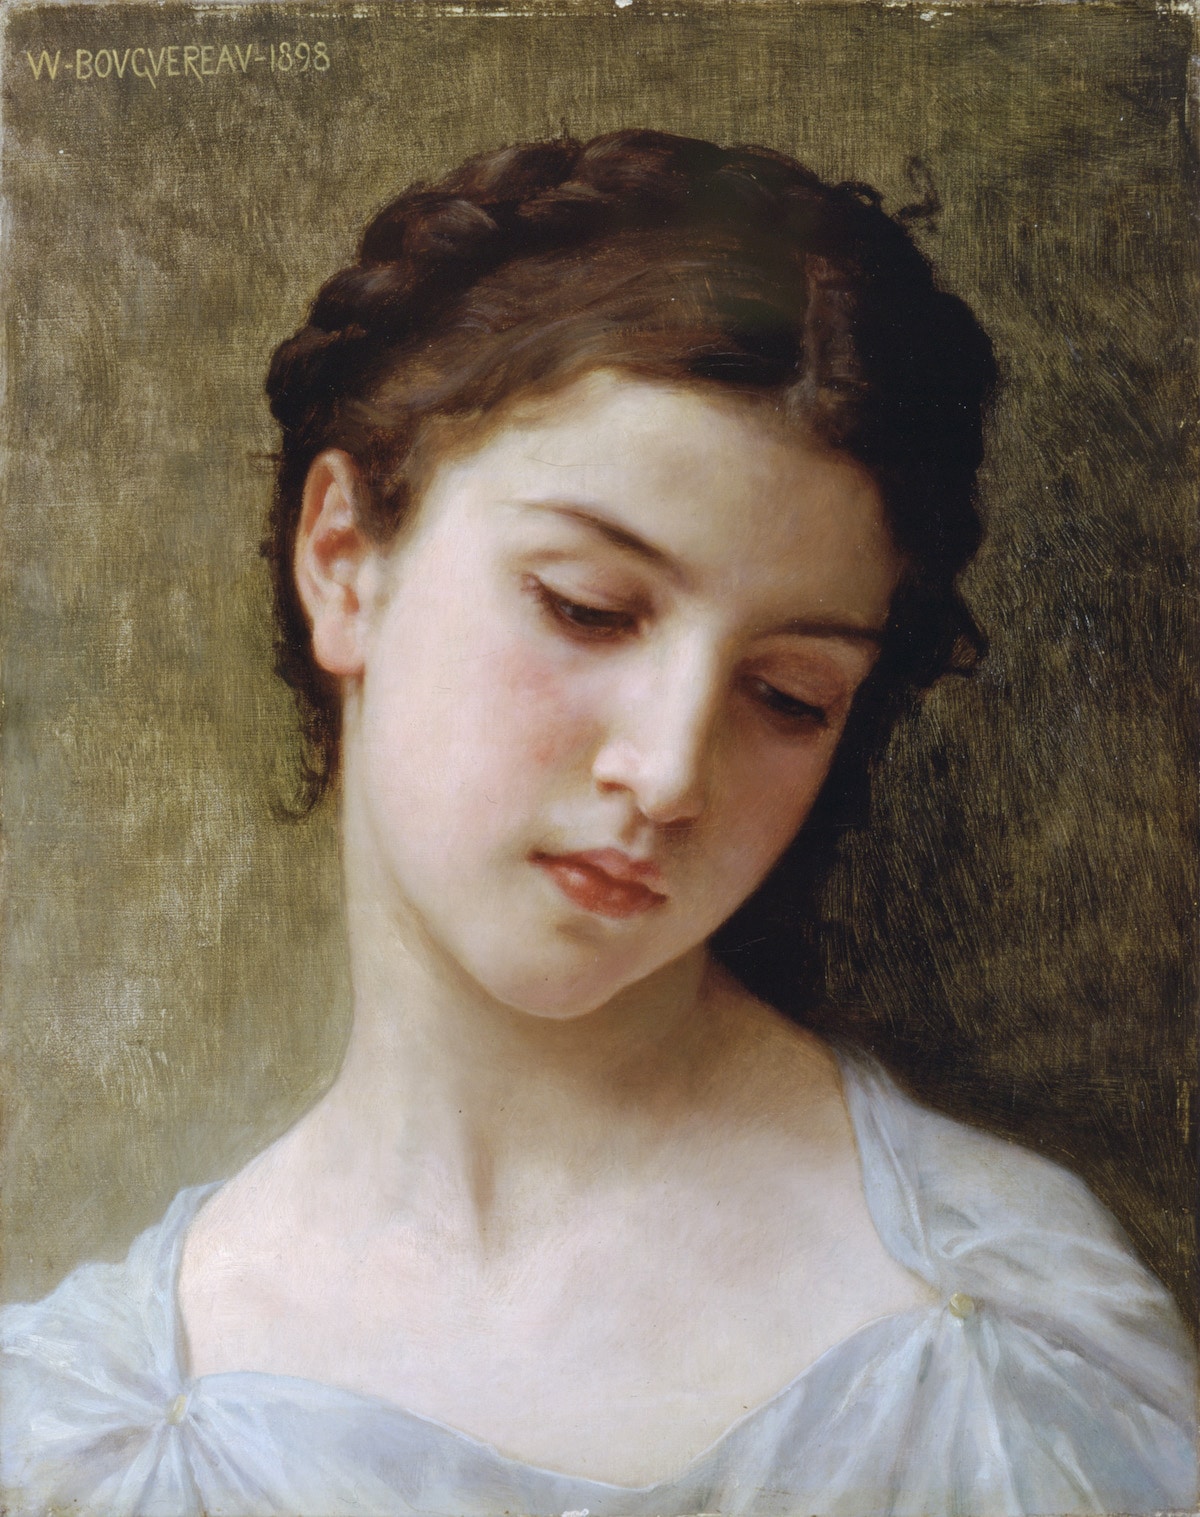 painting by Bouguereau